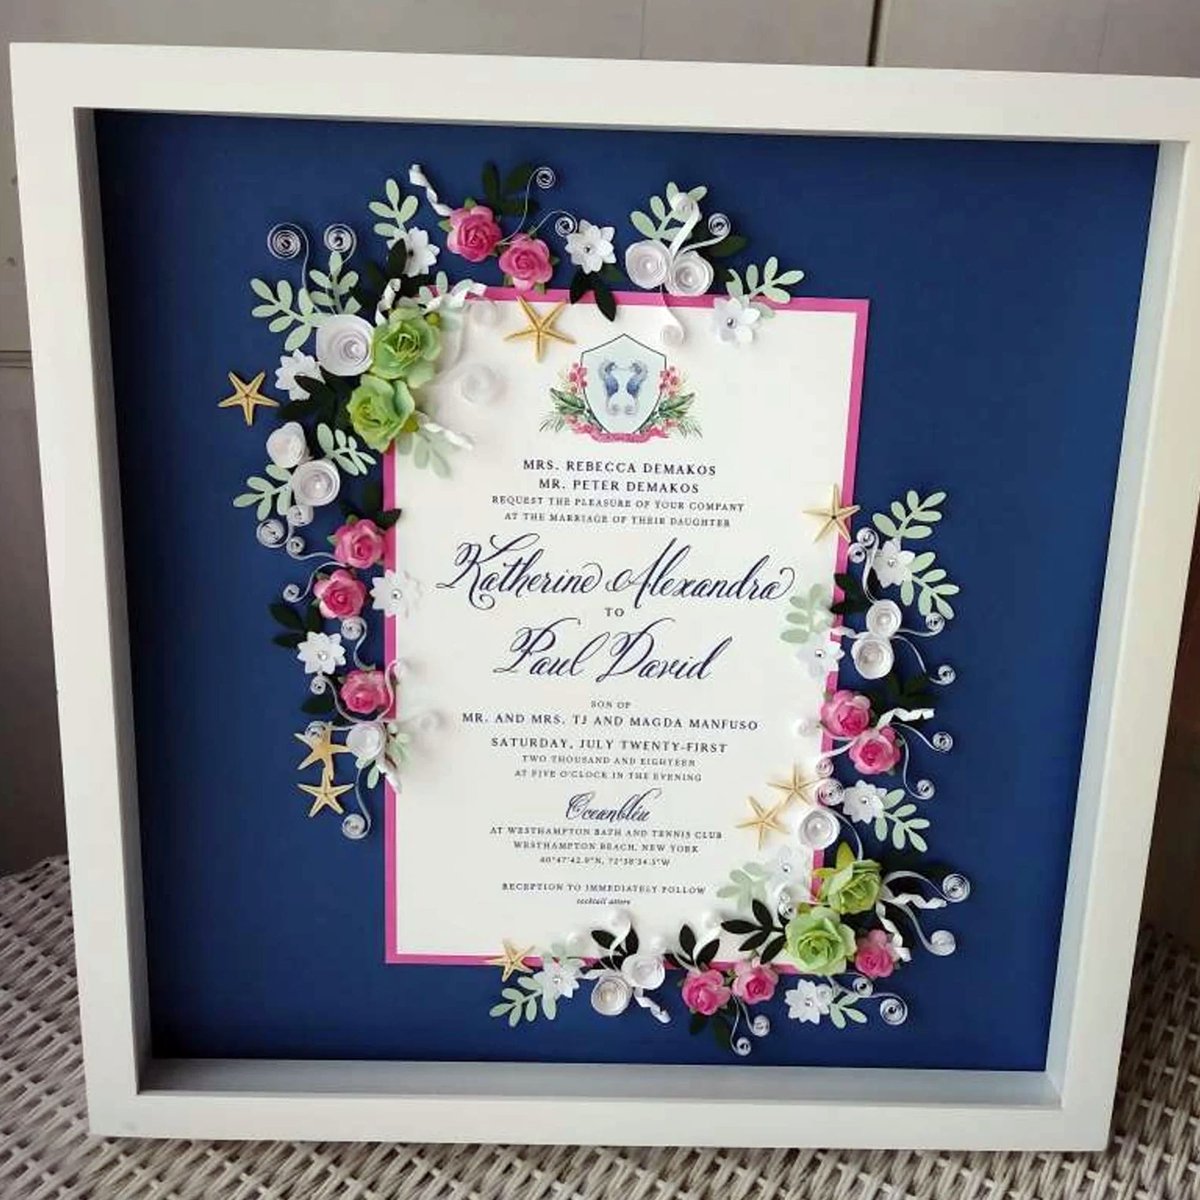 How to use a shadow box to display your wedding invitation